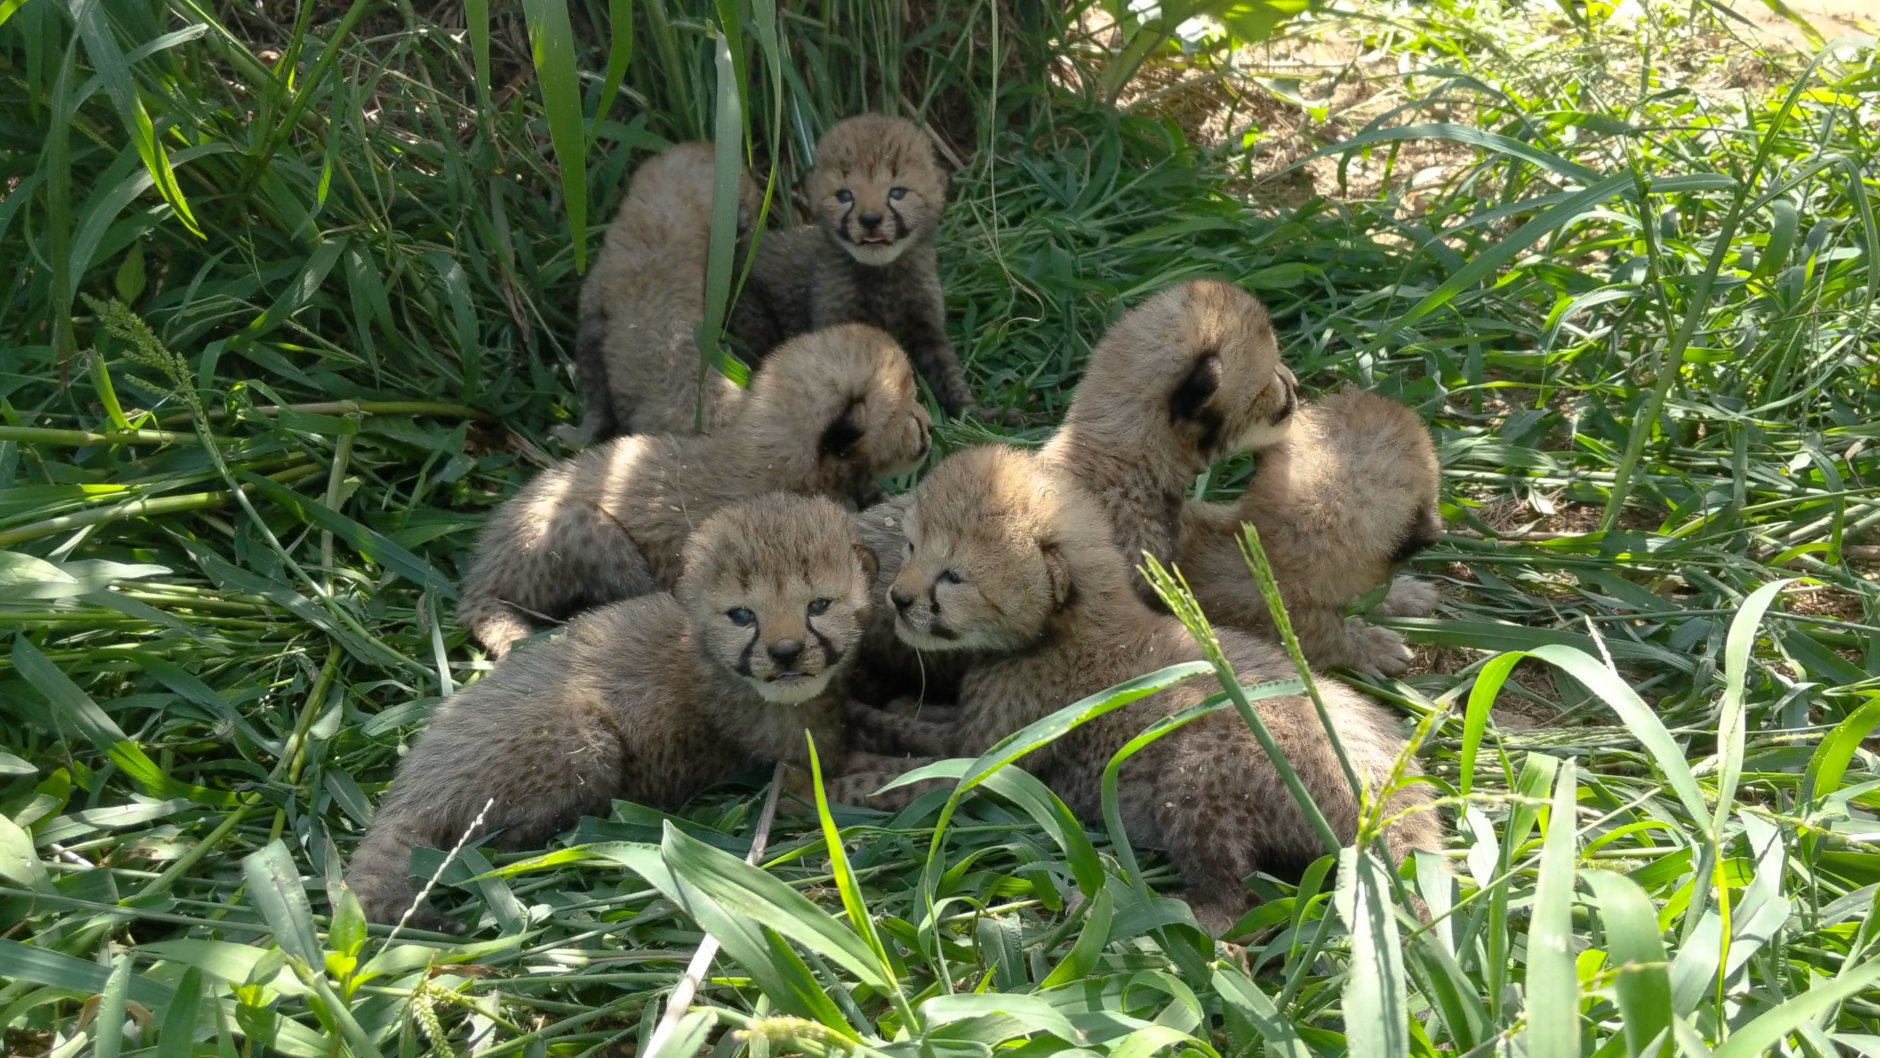 The seven new cheetah cubs, born July 9, appear to be in good health. (Courtesy Smithsonian Conservation Biology Institute/Adriana Kopp)